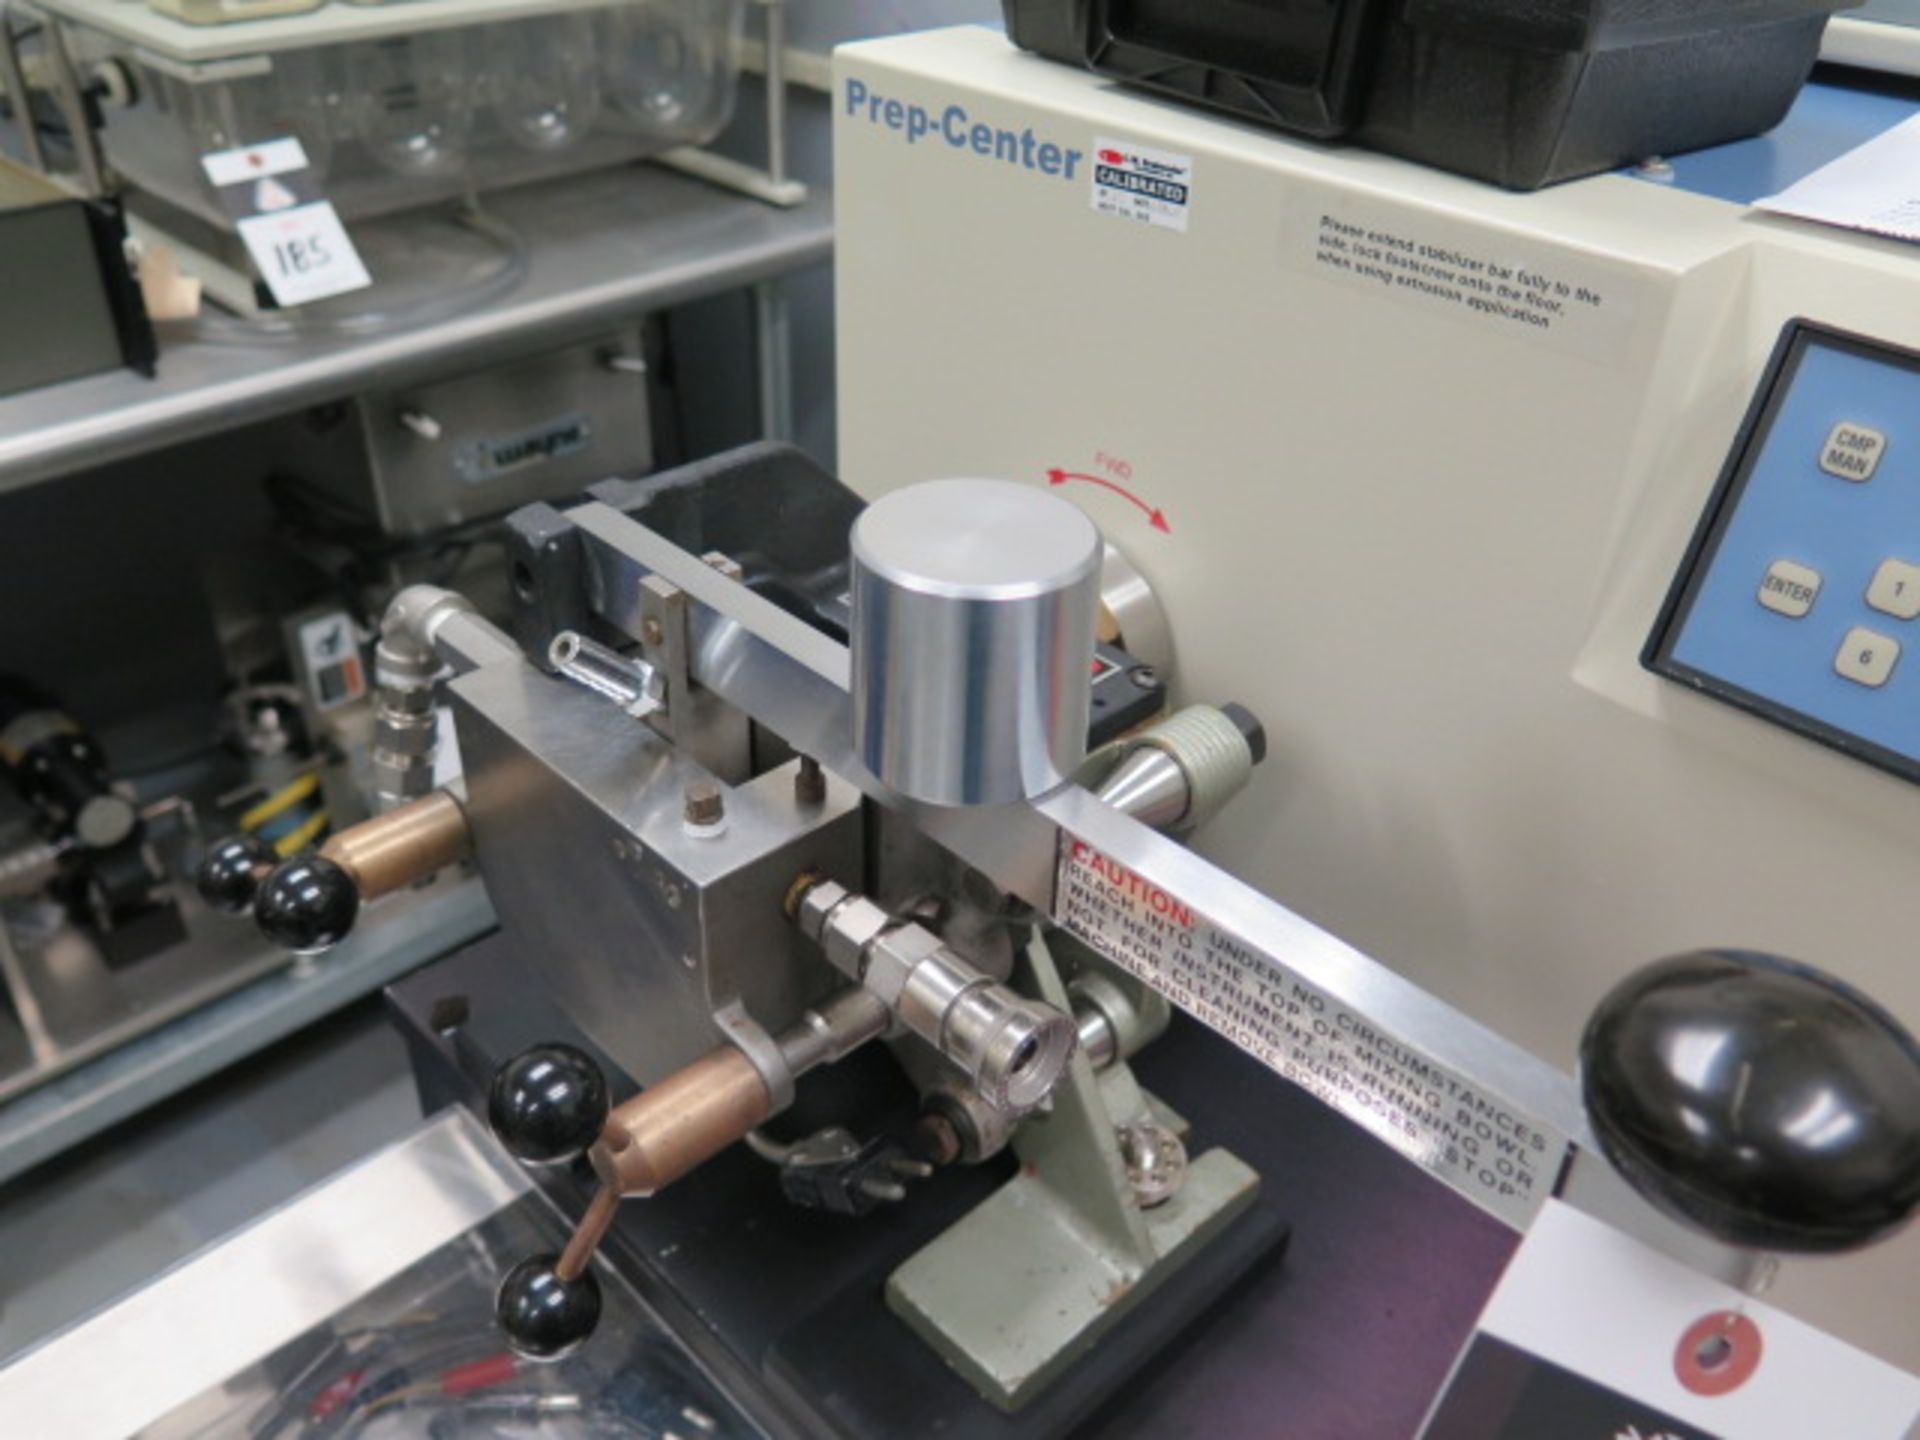 Brabender Prep-Center Type 08-13-000 Extruder s/n 765-ABB w/ R.E.O.-6/2 Measuring Head (Tests Proces - Image 4 of 10